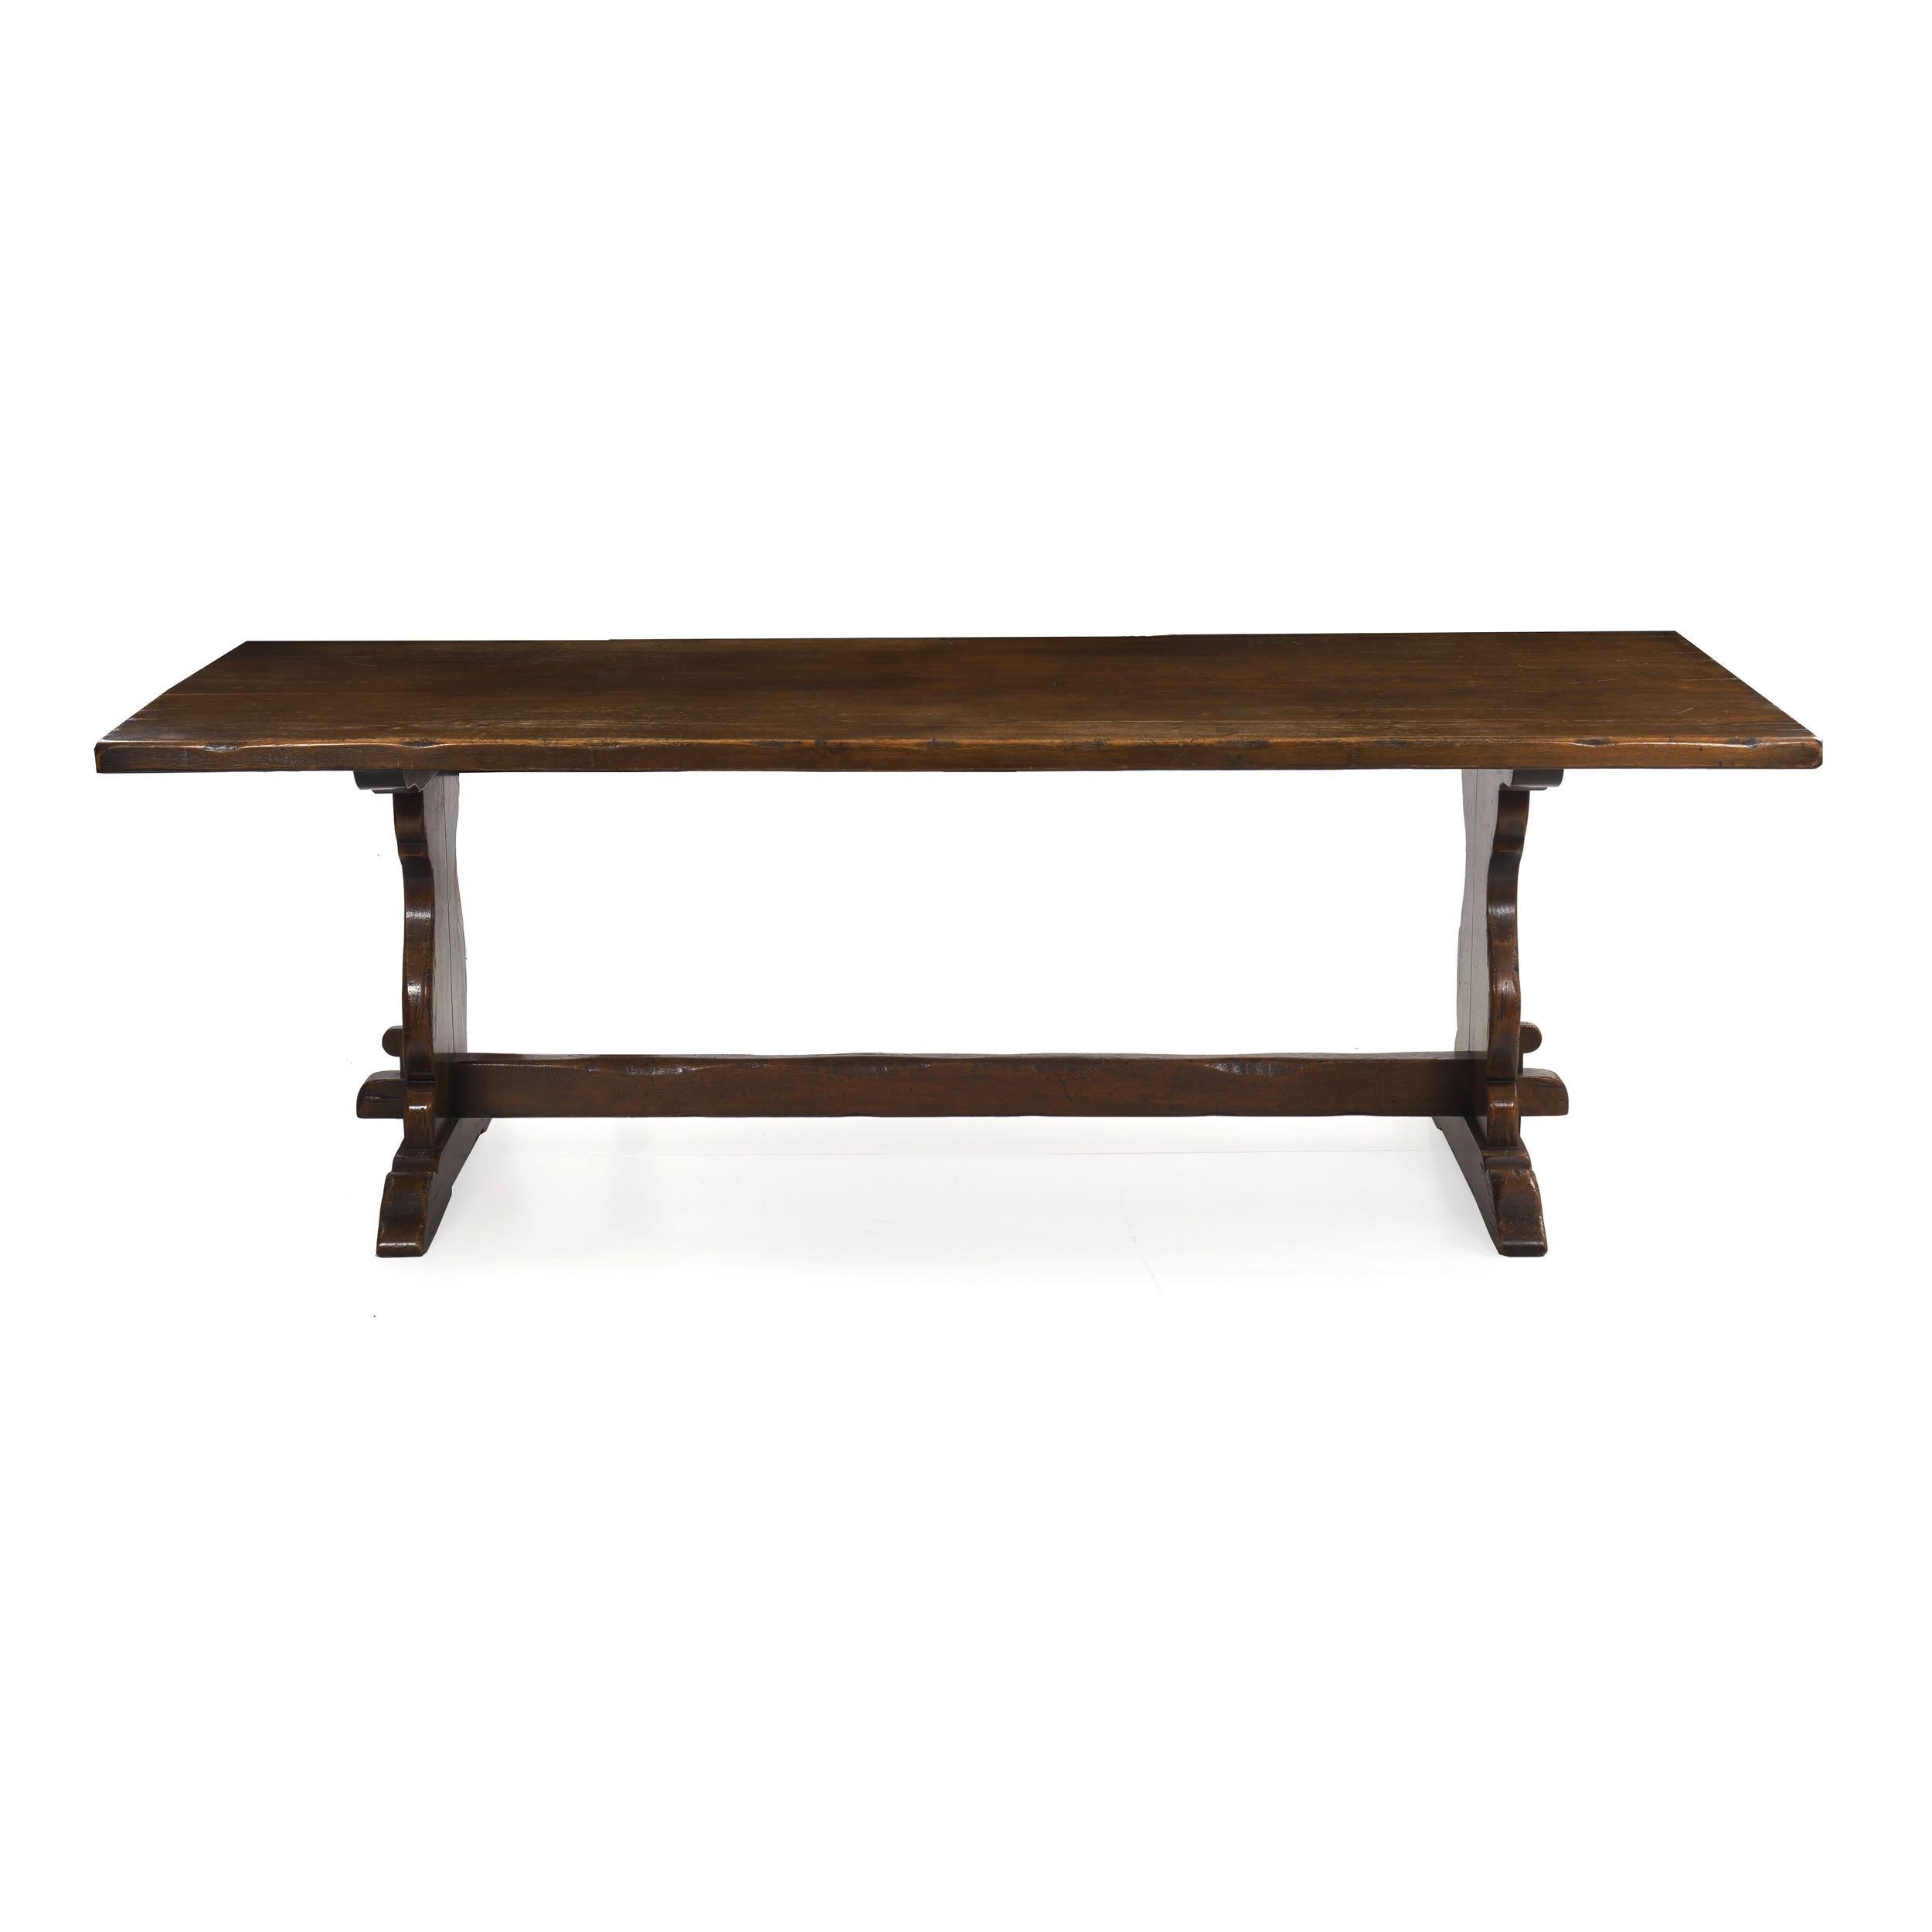 A heavy and incredibly well built refectory dining table, it is crafted with careful period techniques with huge solid golden oak planks utilized for every element. The top is a carefully joined set of five planks that are nearly invisibly brought